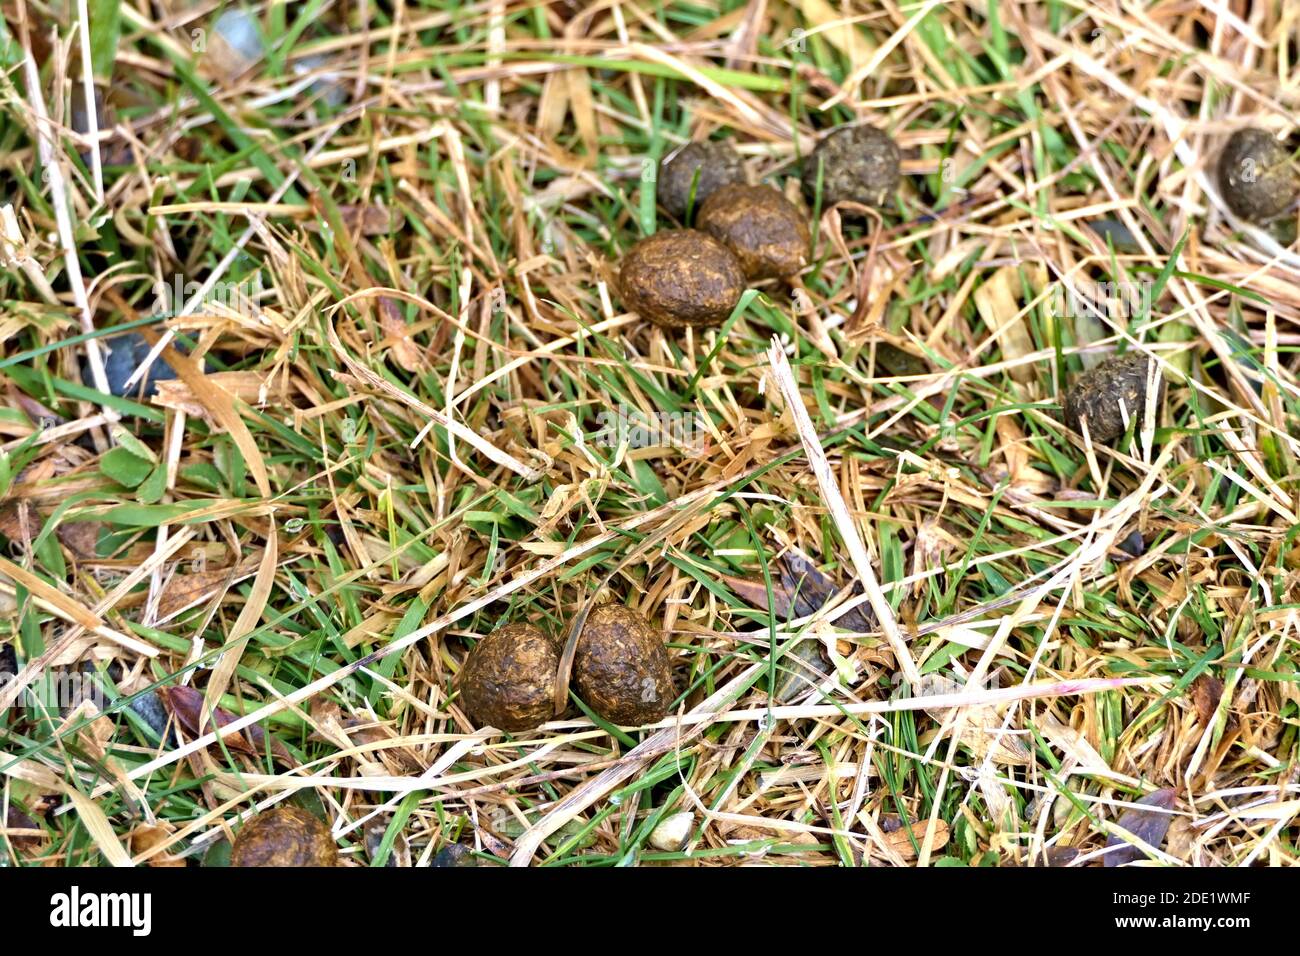 Feces or dung of a hare or rabbit lying on grass in the wild Stock Photo